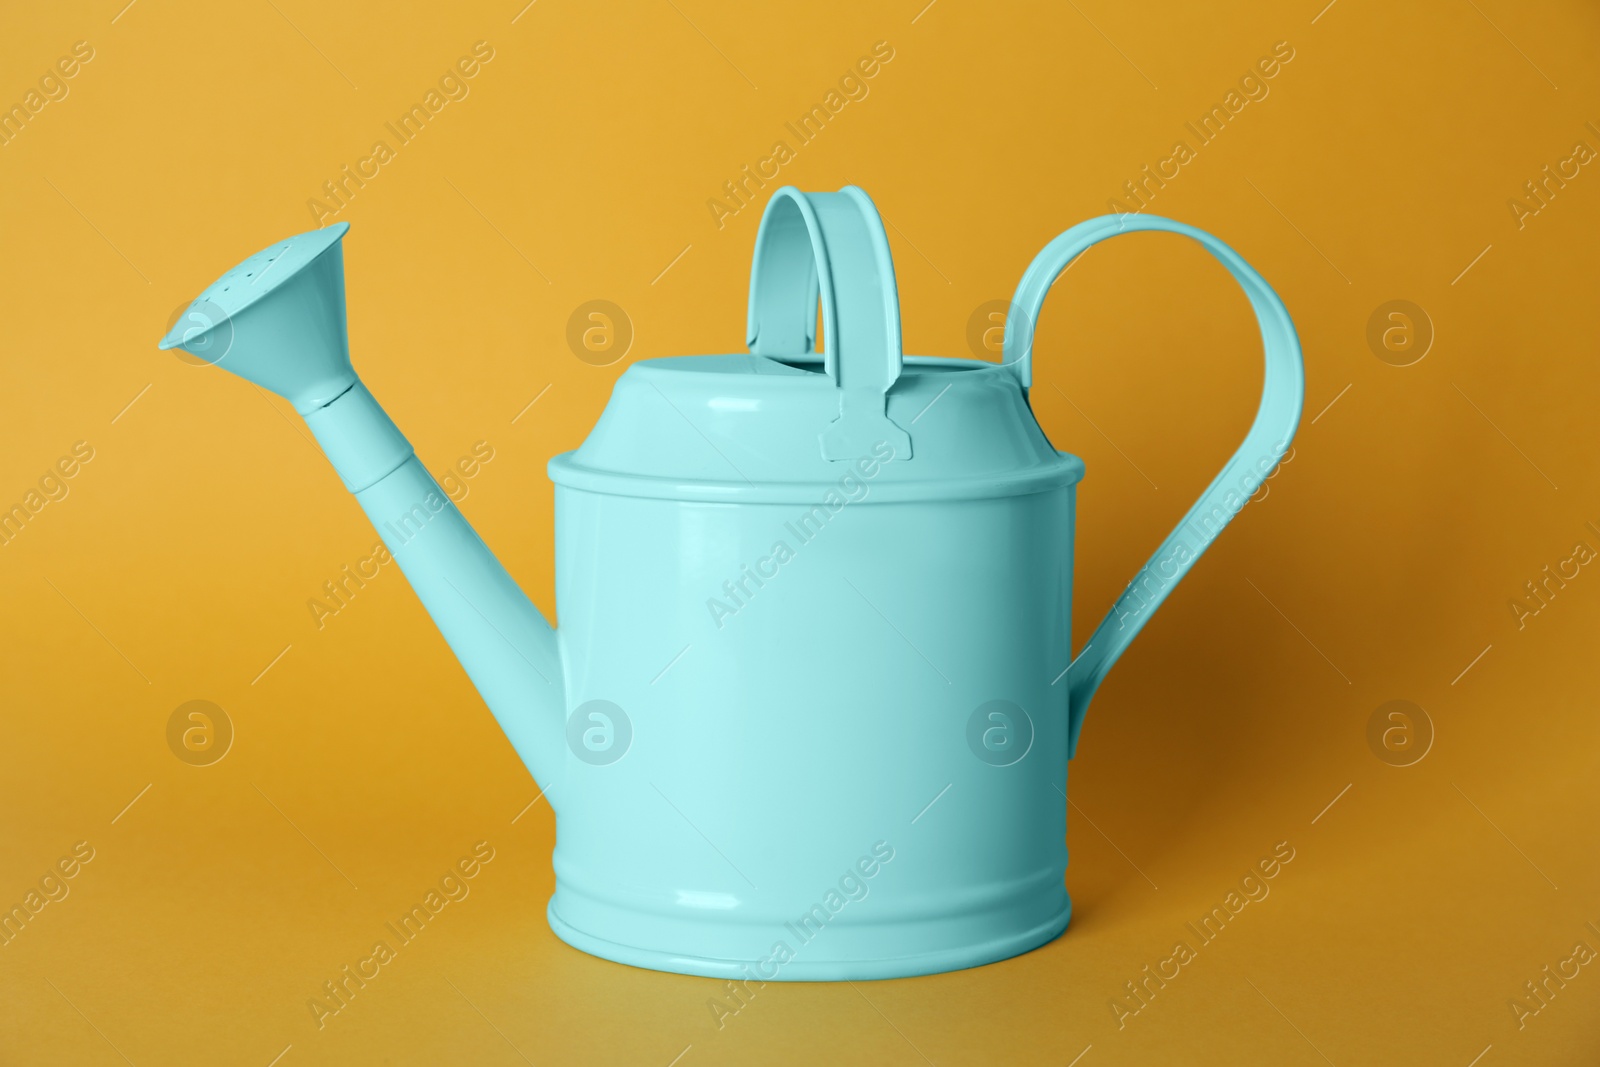 Photo of Turquoise metal watering can on yellow background